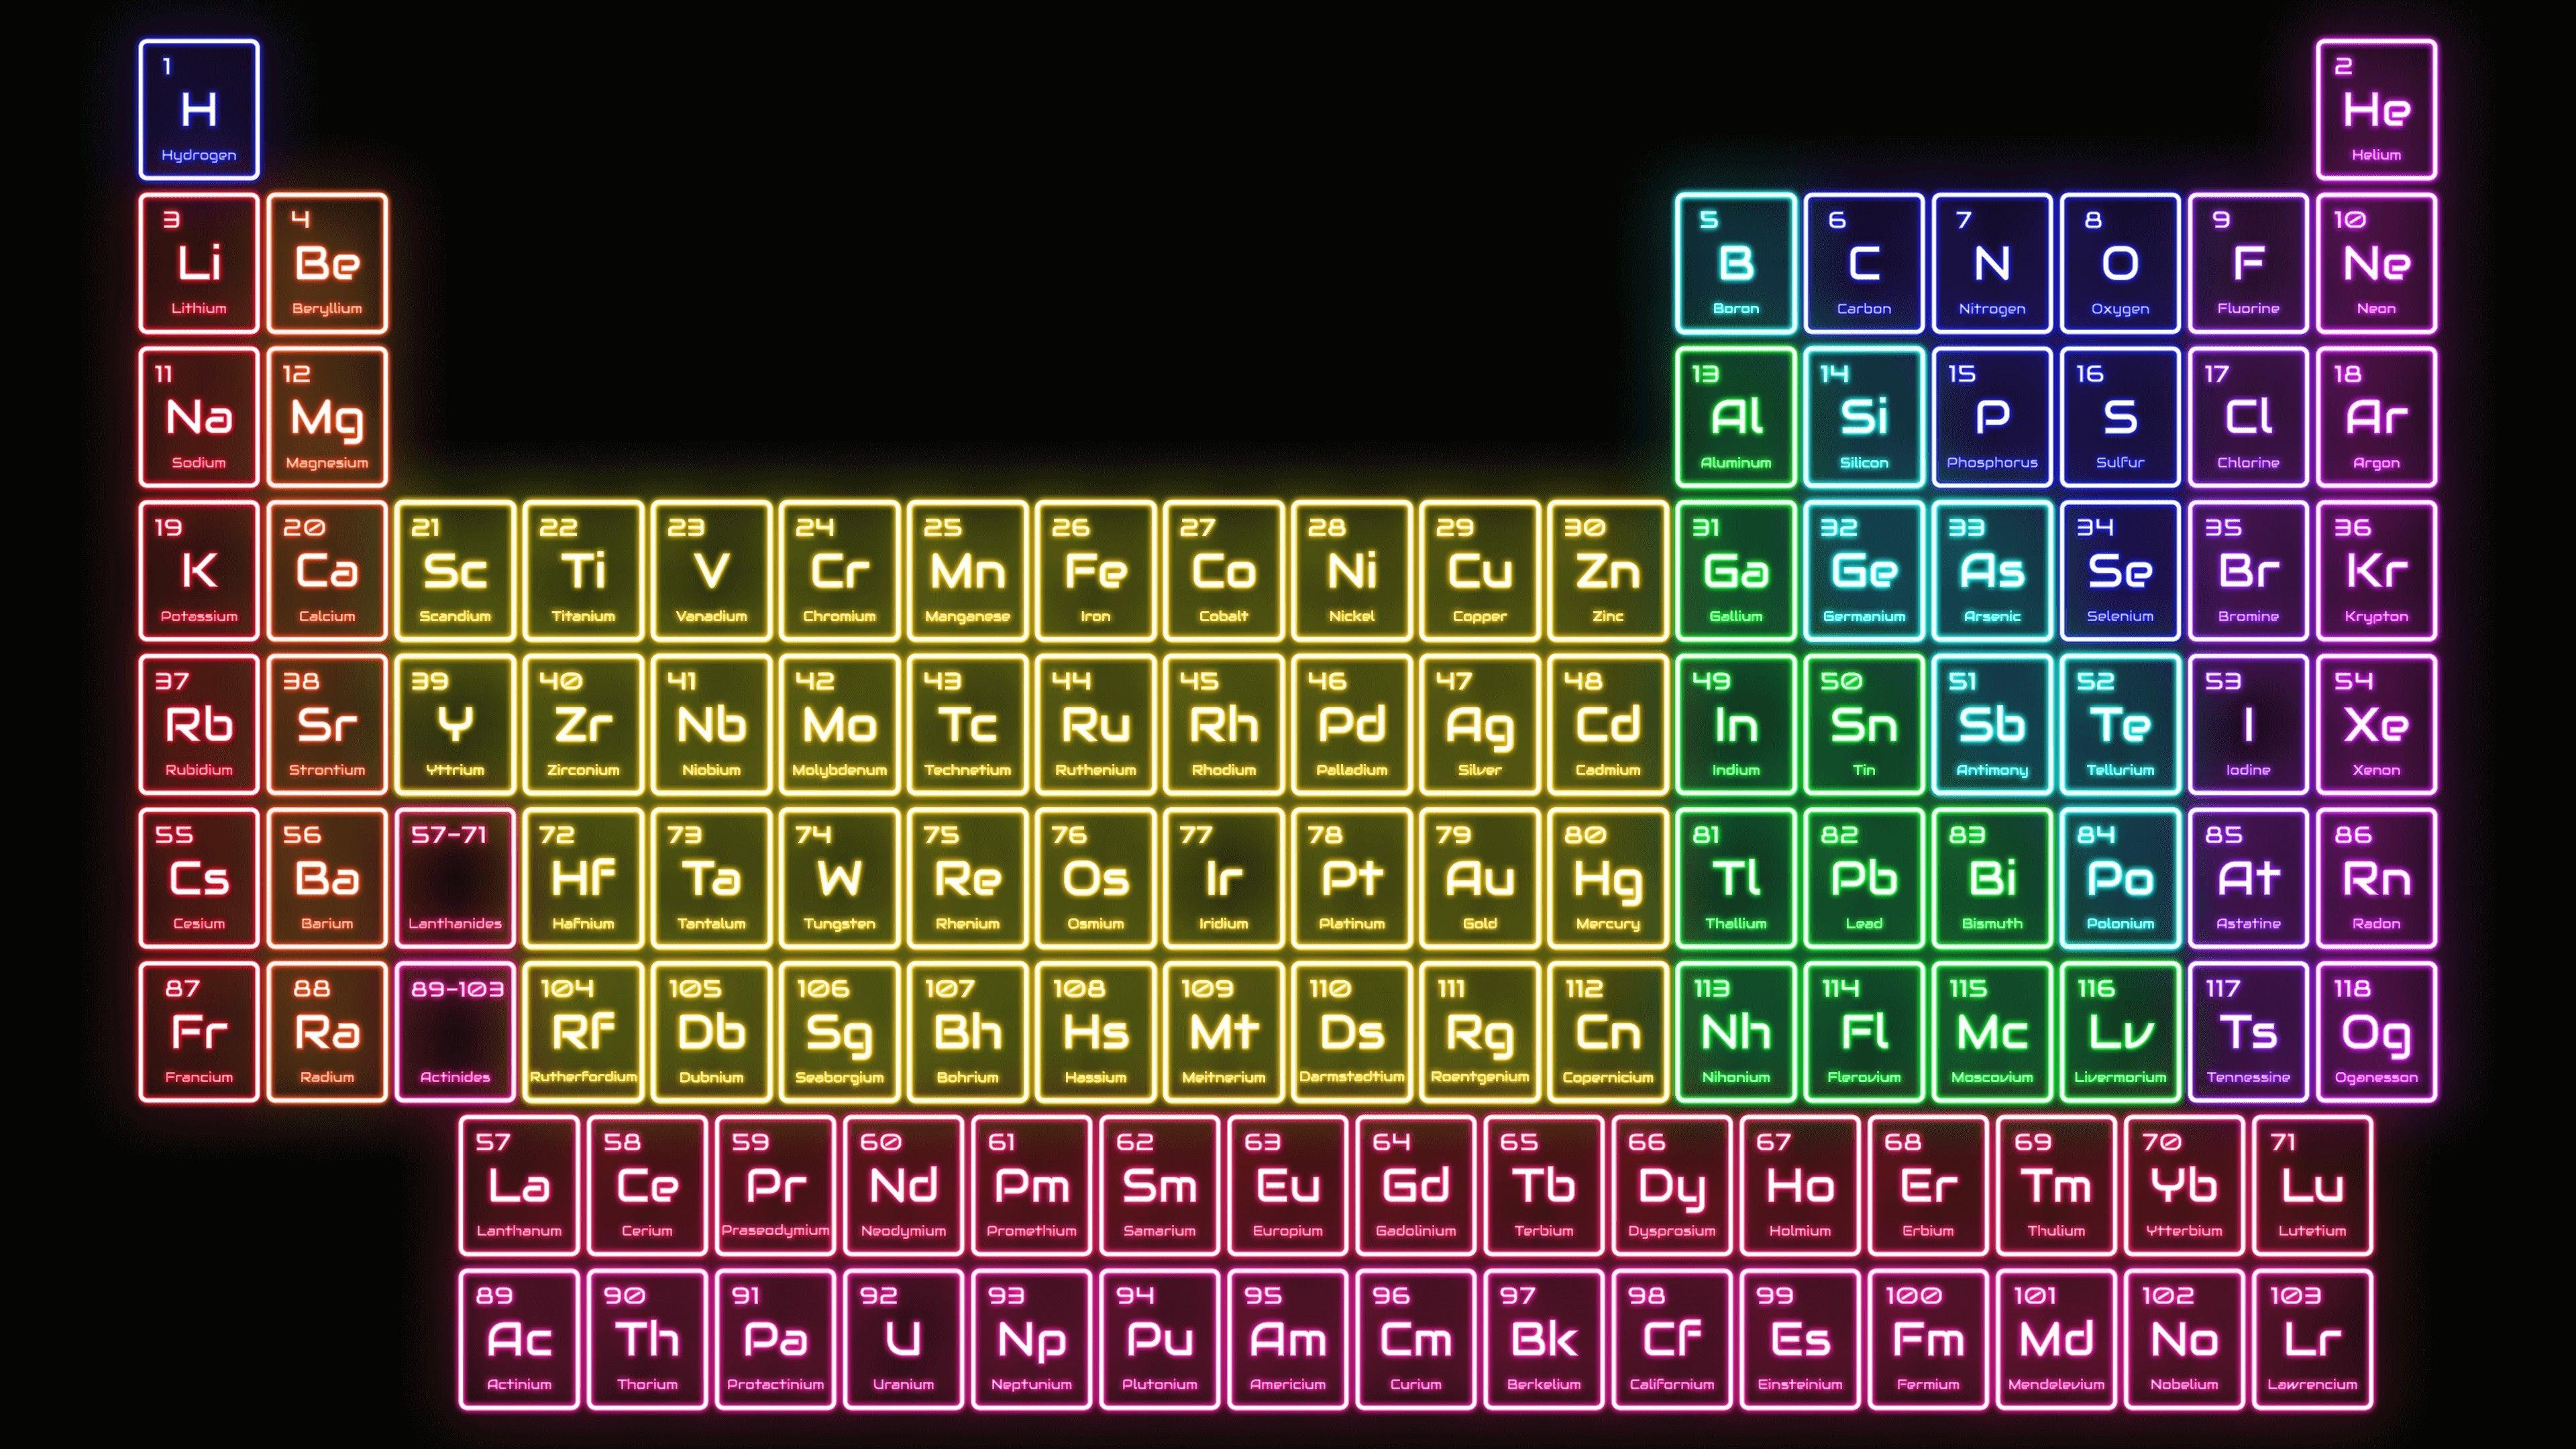 Periodic Table Of Elements Wallpaper New Periodic Table Elements